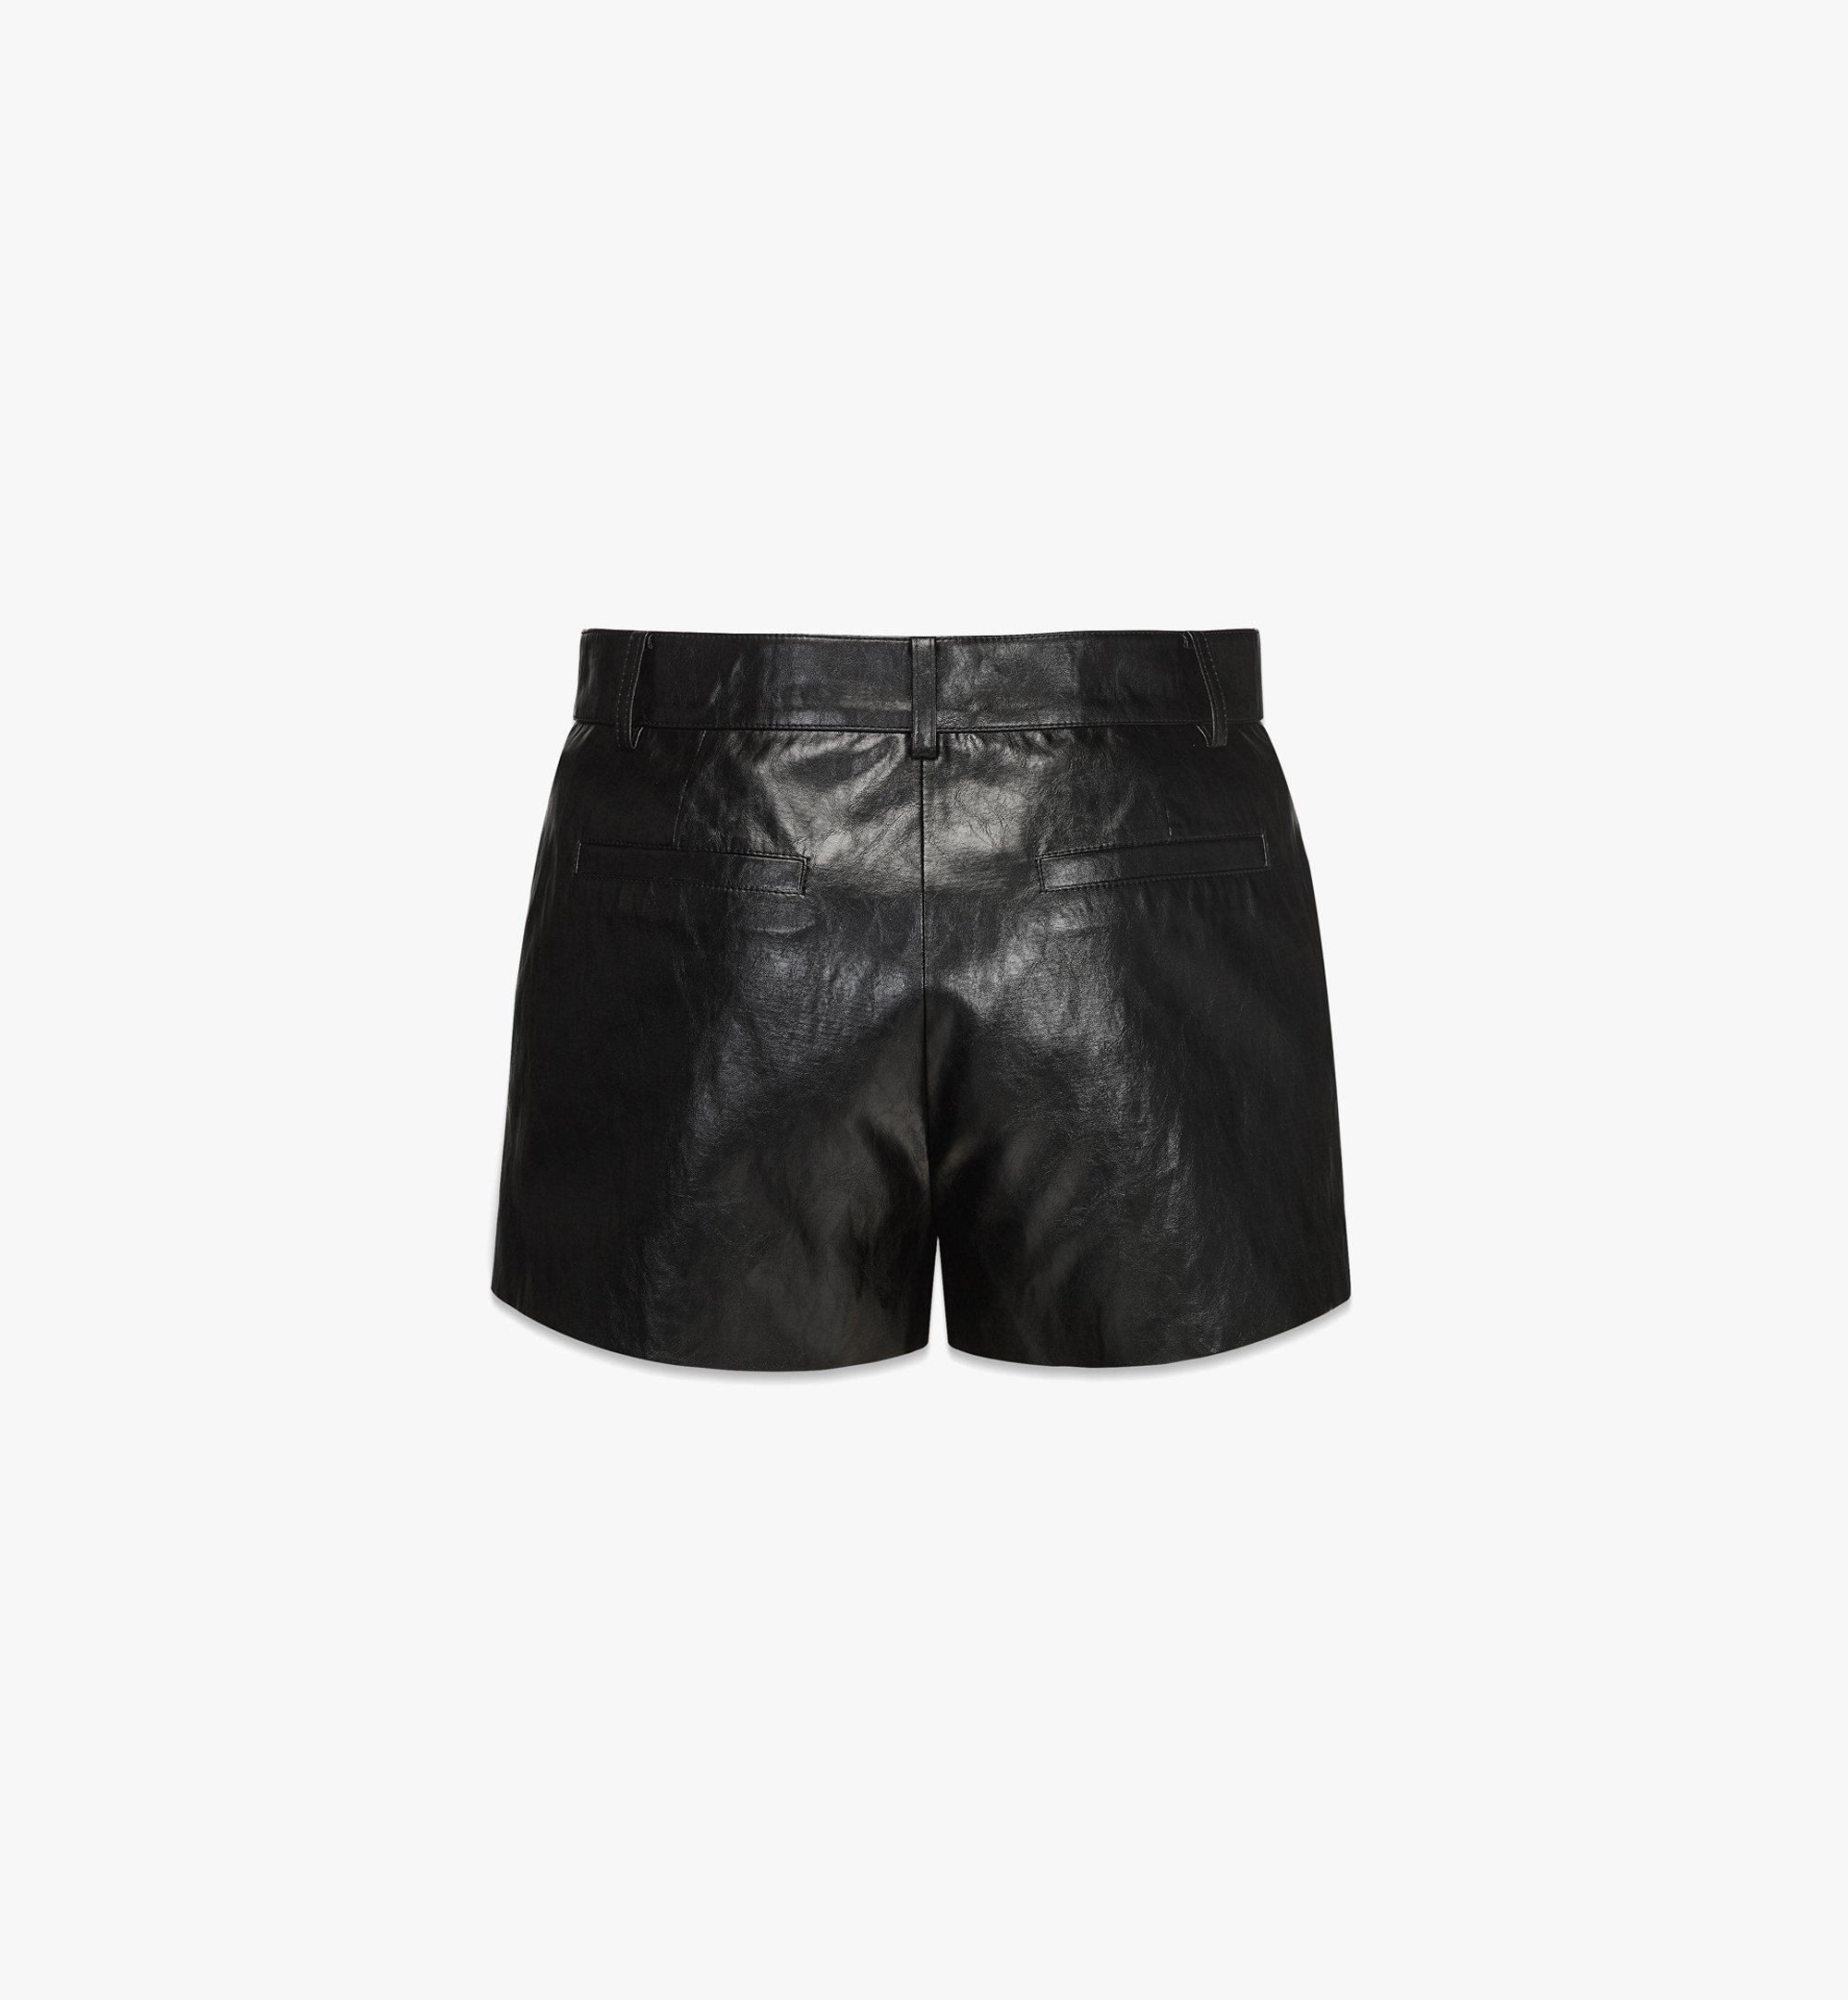 MCM Shorts in Crushed Faux Leather Black MFPDSMM02BK00M Alternate View 1